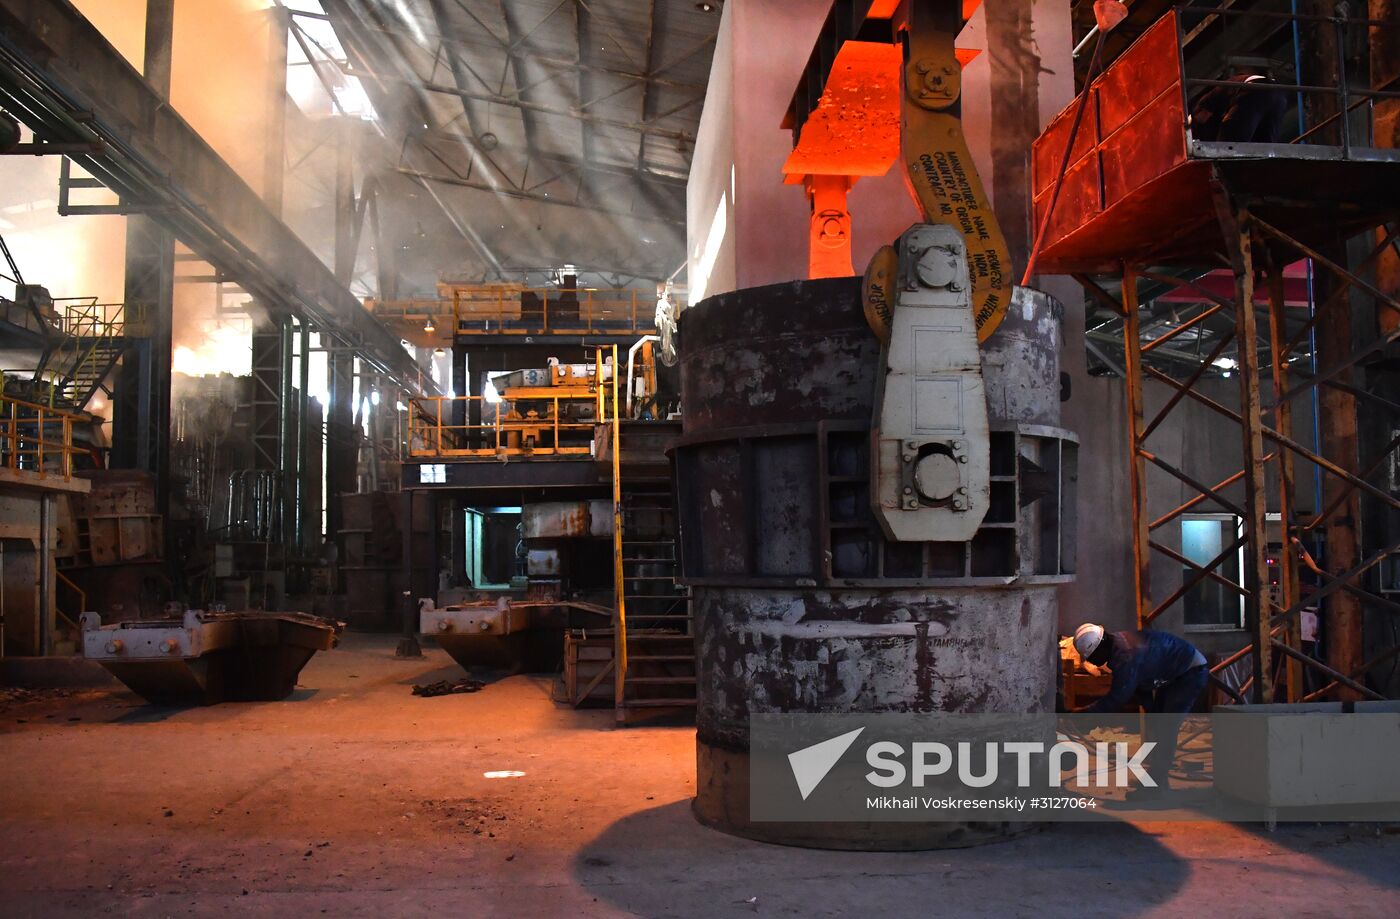 Iron and steel works in Hama, Syria